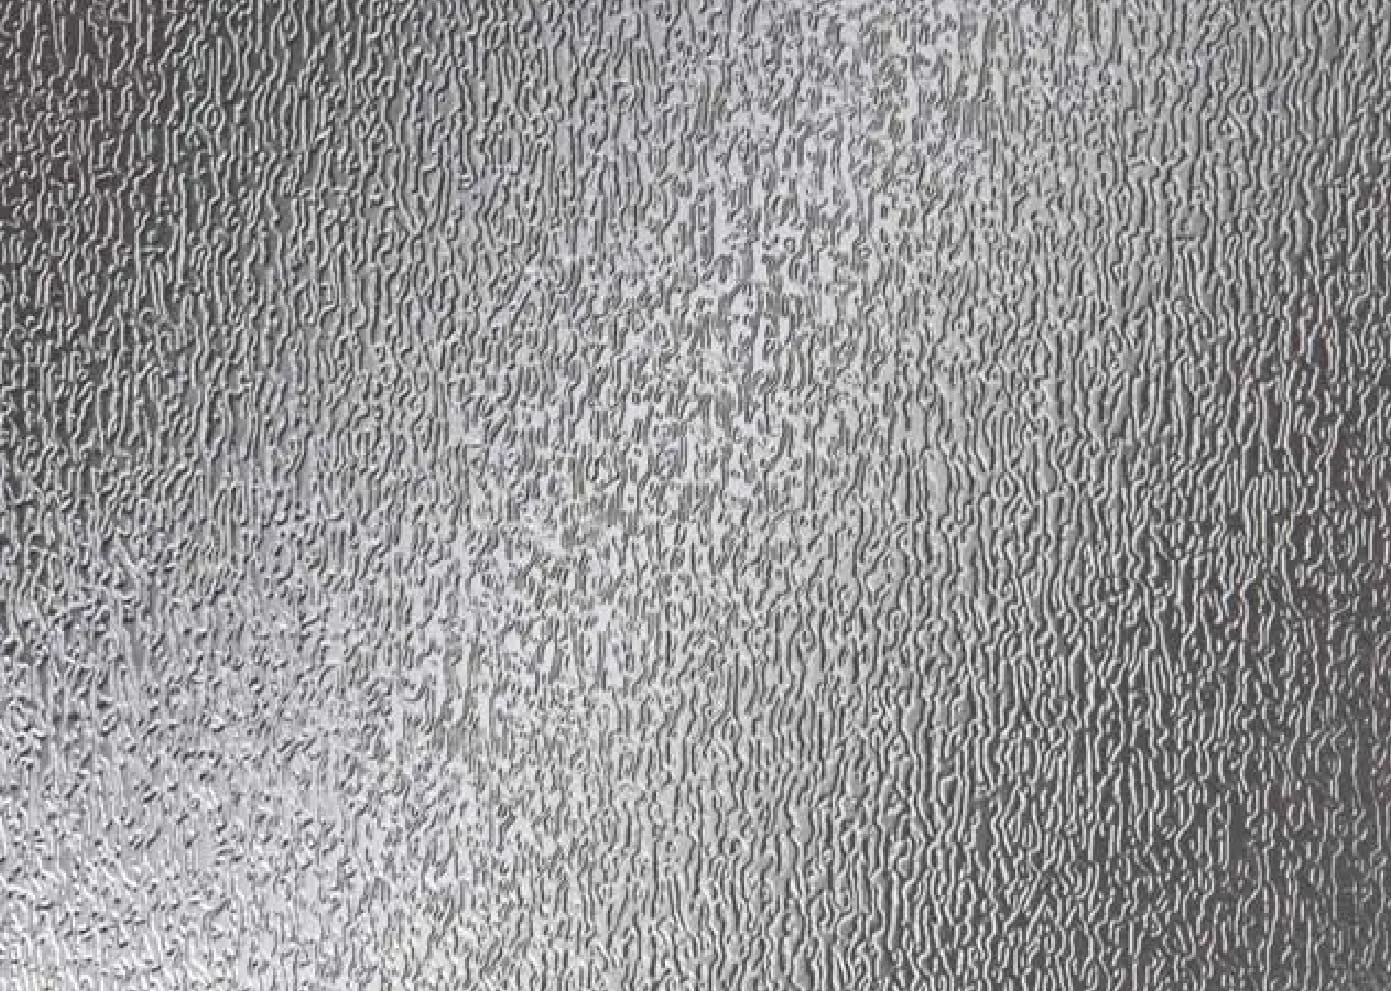 A close up of the silver surface of a metal sheet.